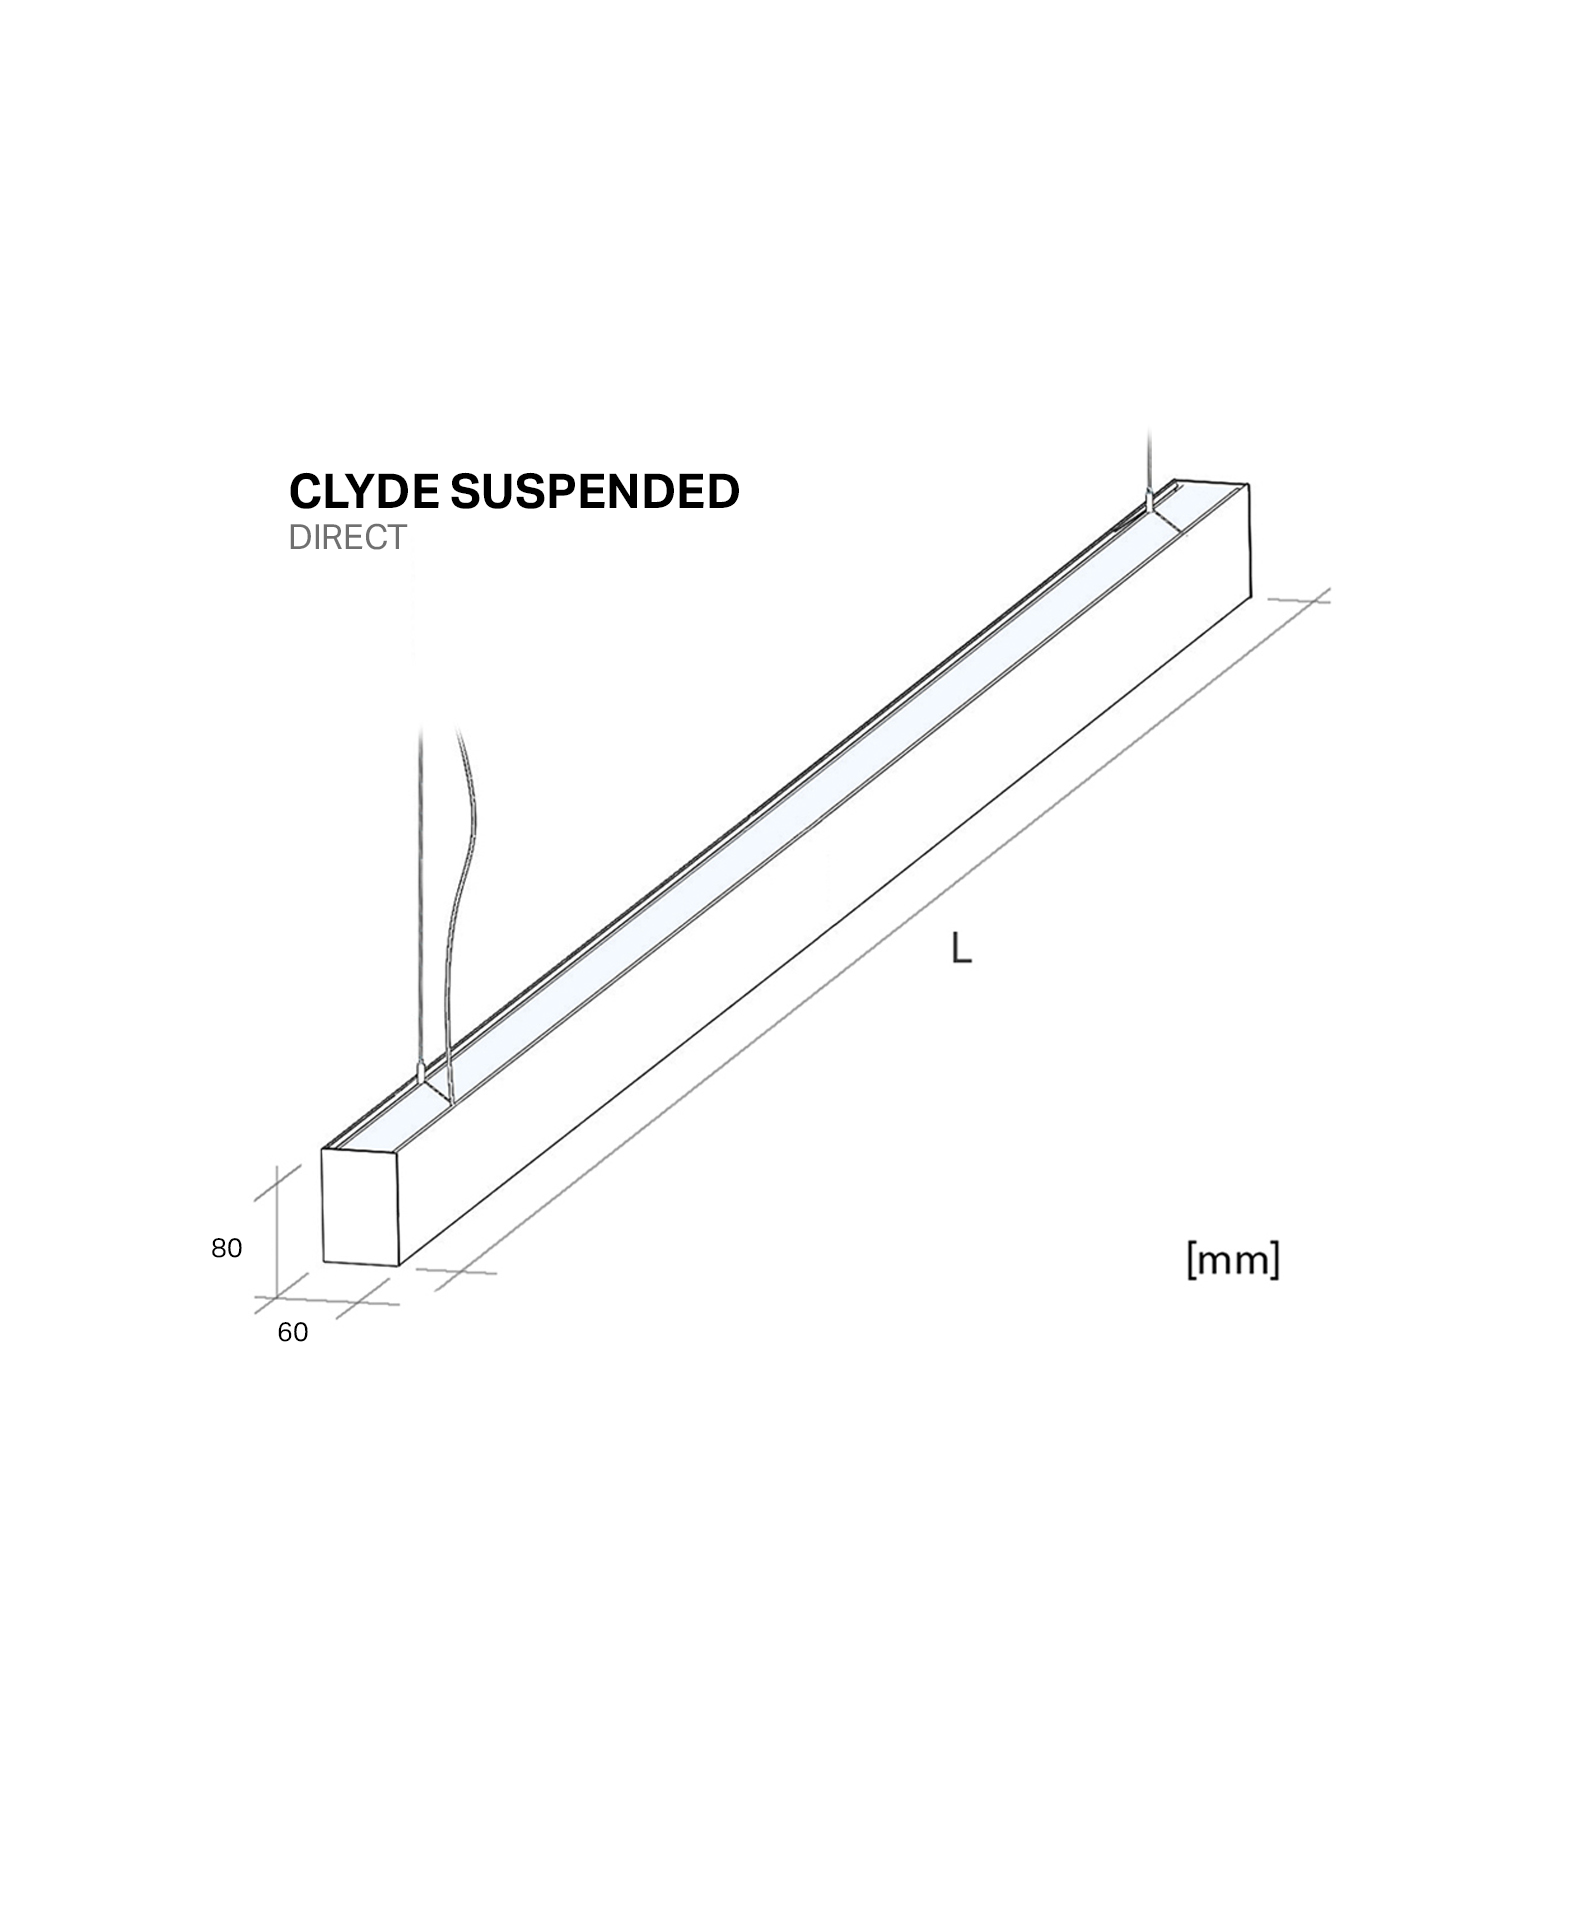 clyde-suspended-direct-technical-drawing